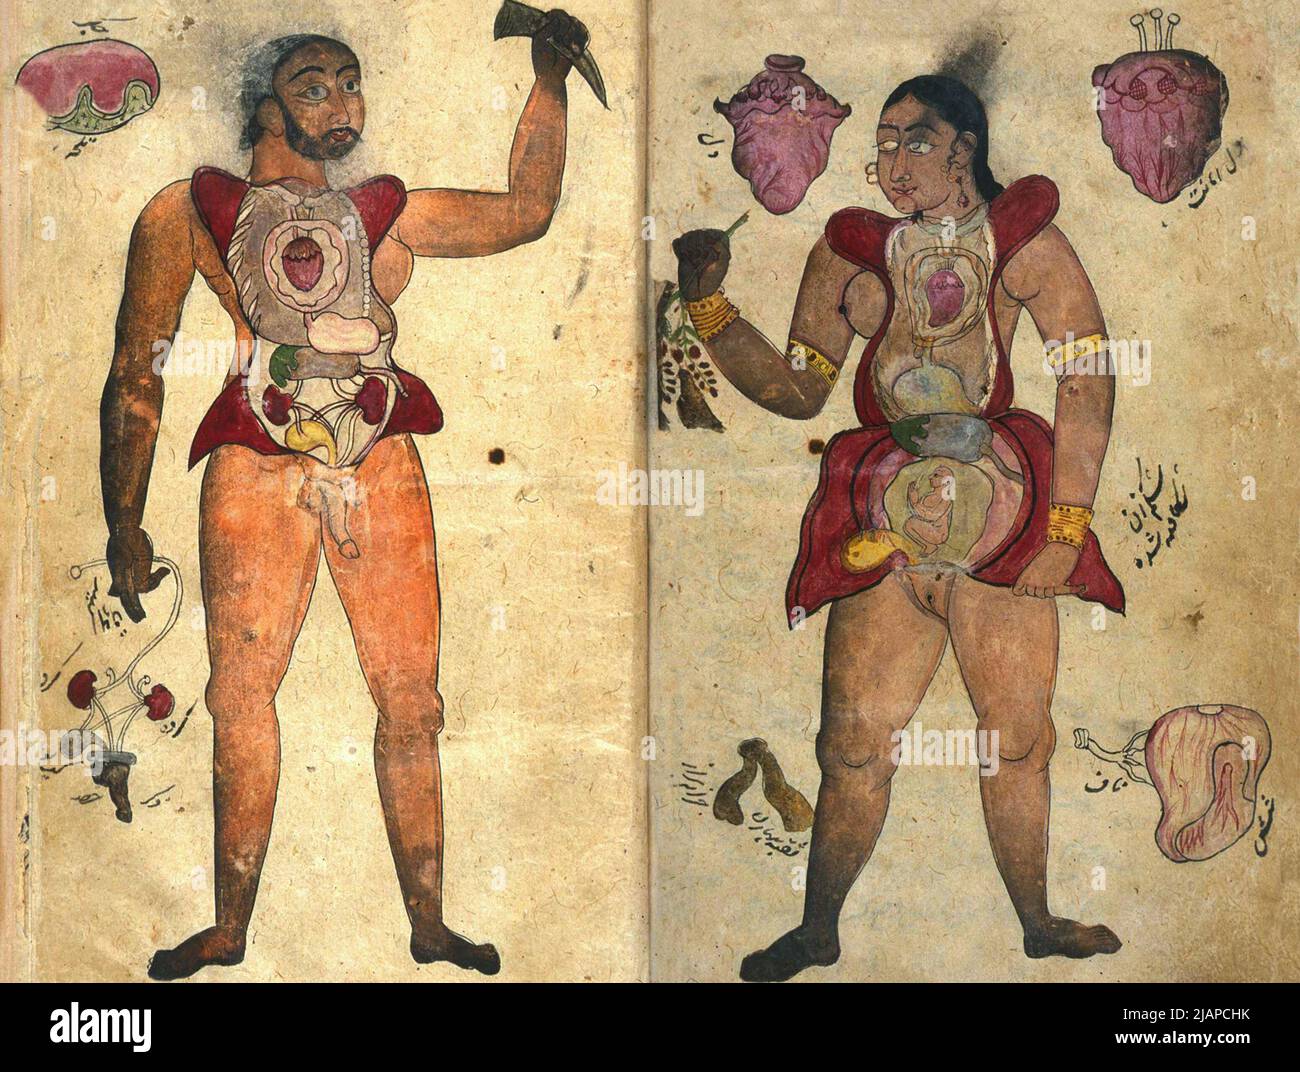 Anonymous Persian Anatomical illustrations from Iran or Pakistan, c.1680Ð1750 showing anatomical figures of a pregnant female and a male. The woman holds back a flap of abdominal skin to expose the gravid uterus, while in her other hand she appears to hold a plant rather than a part of the body, though that could be interpreted as referring to the female genitalia.  The male figure has his abdomen and chest opened to reveal the internal organs. In a volume containing Tibb al-Akbar (AkbarÕ's Medicine) by Muhammad Akbar. Stock Photo